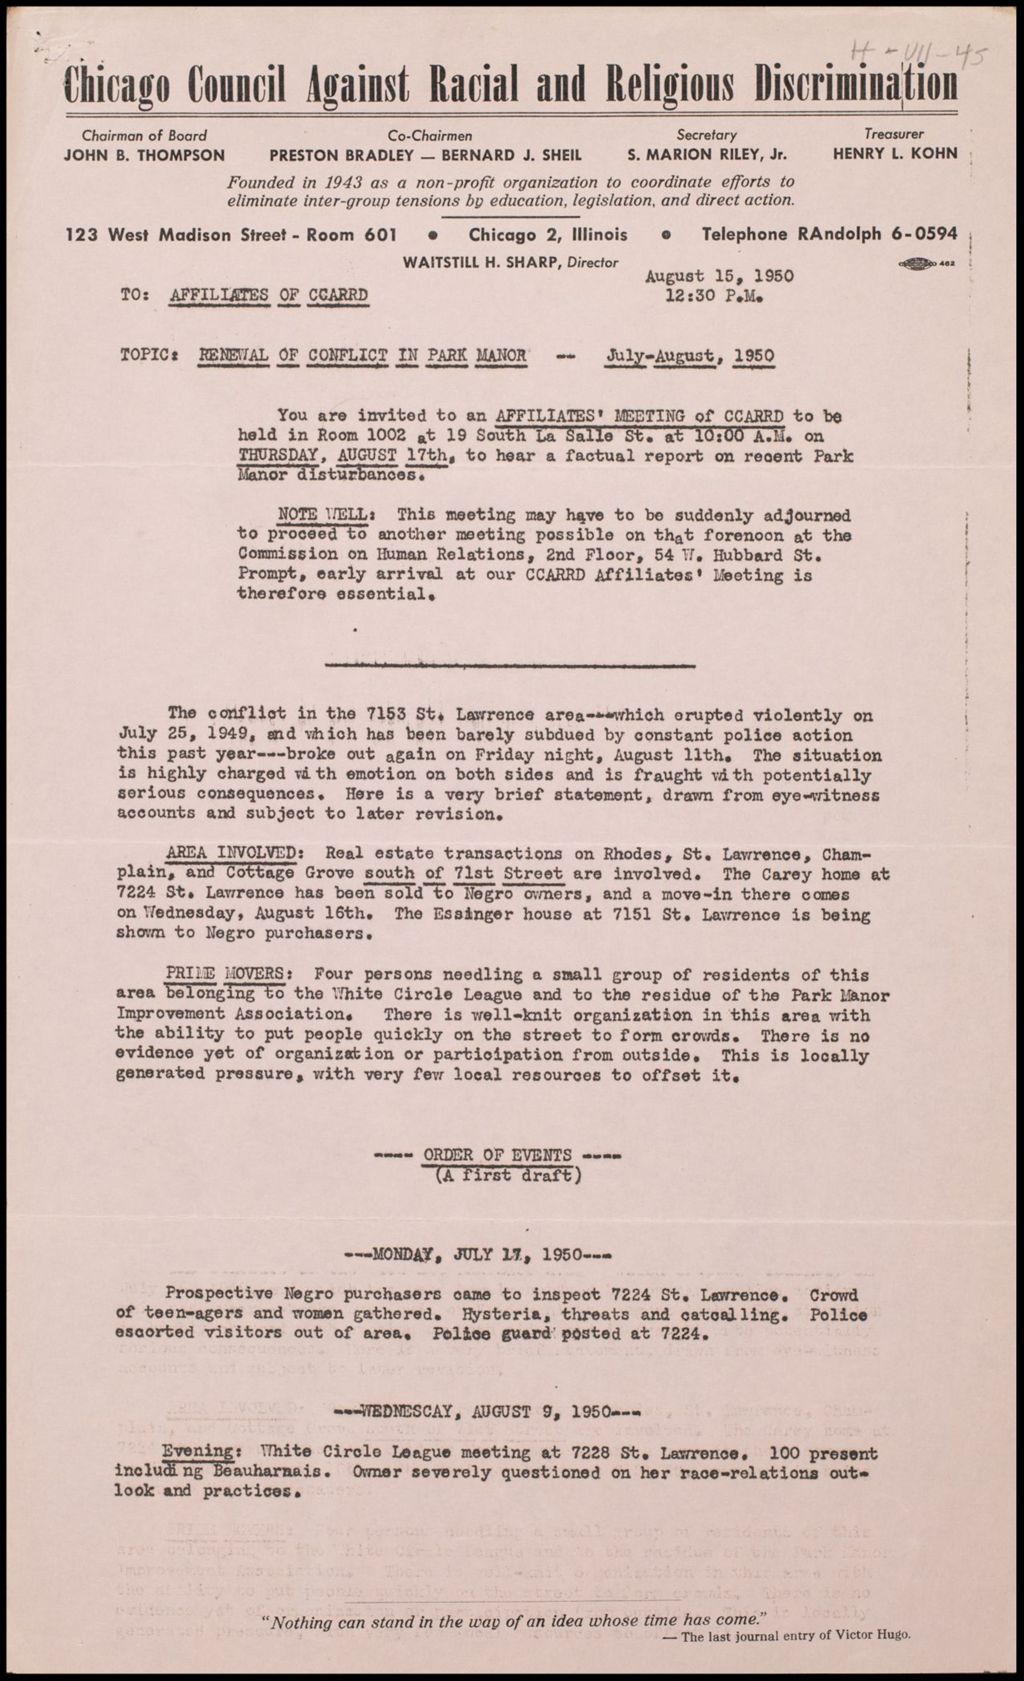 Miniature of Human Relations Department - Chicago Council Against Racial and Religious Discrimination, 1950-1954 (Folder I-2630)